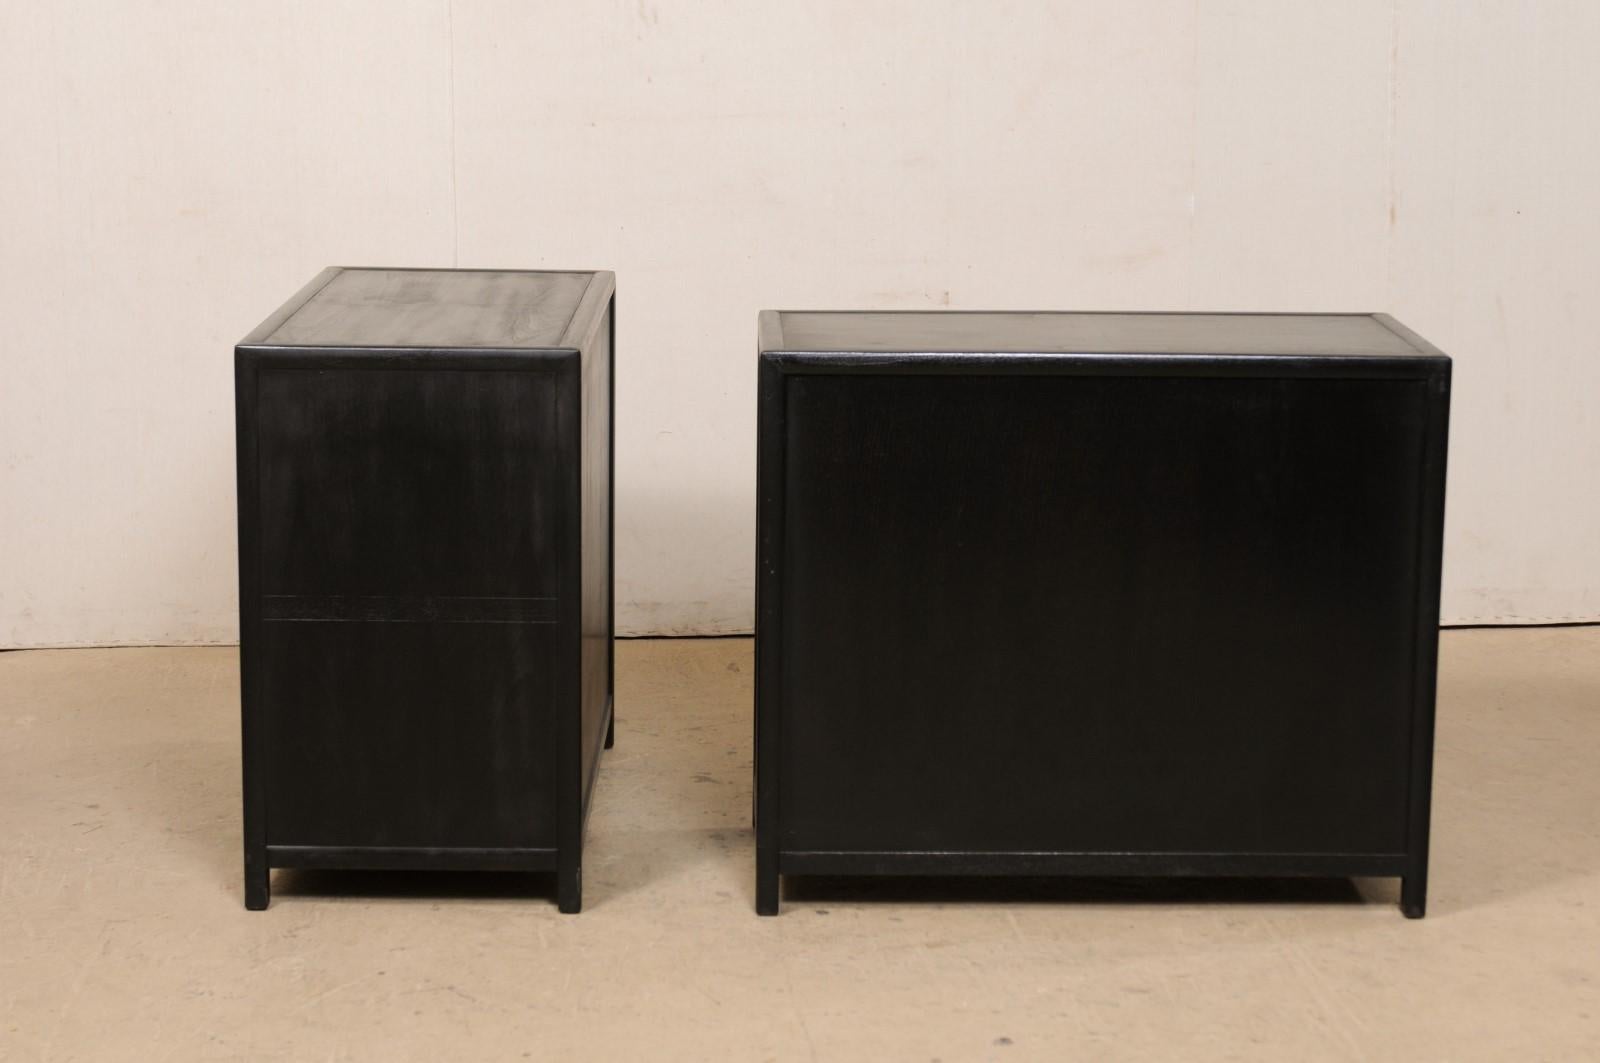 Pair Vintage Chest of Drawers in Black with Silver Hardware, Clean Modern Design For Sale 3